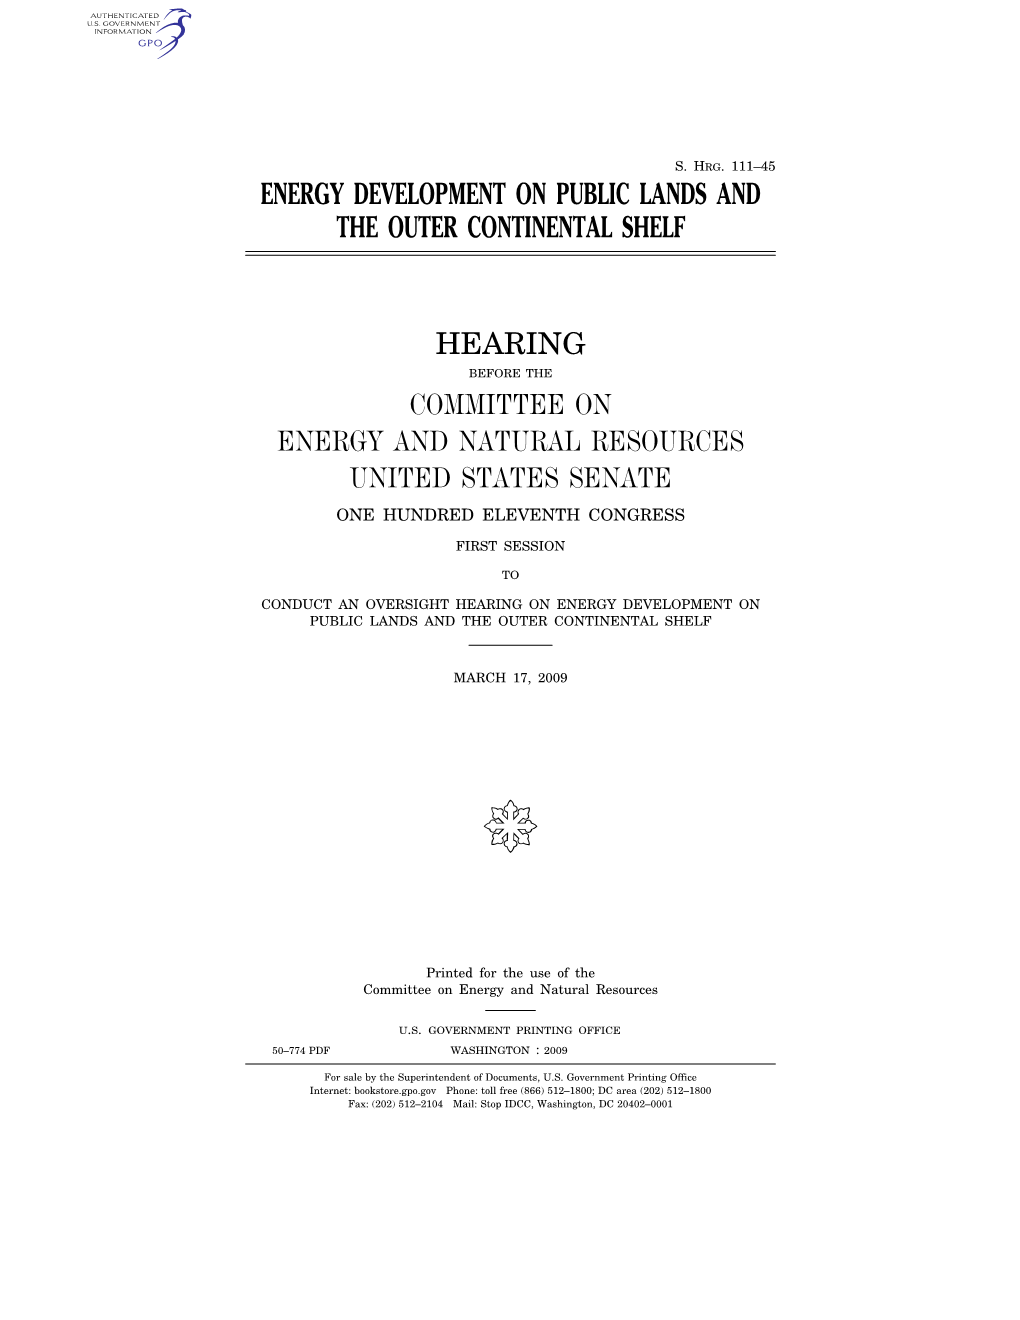 Energy Development on Public Lands and the Outer Continental Shelf Hearing